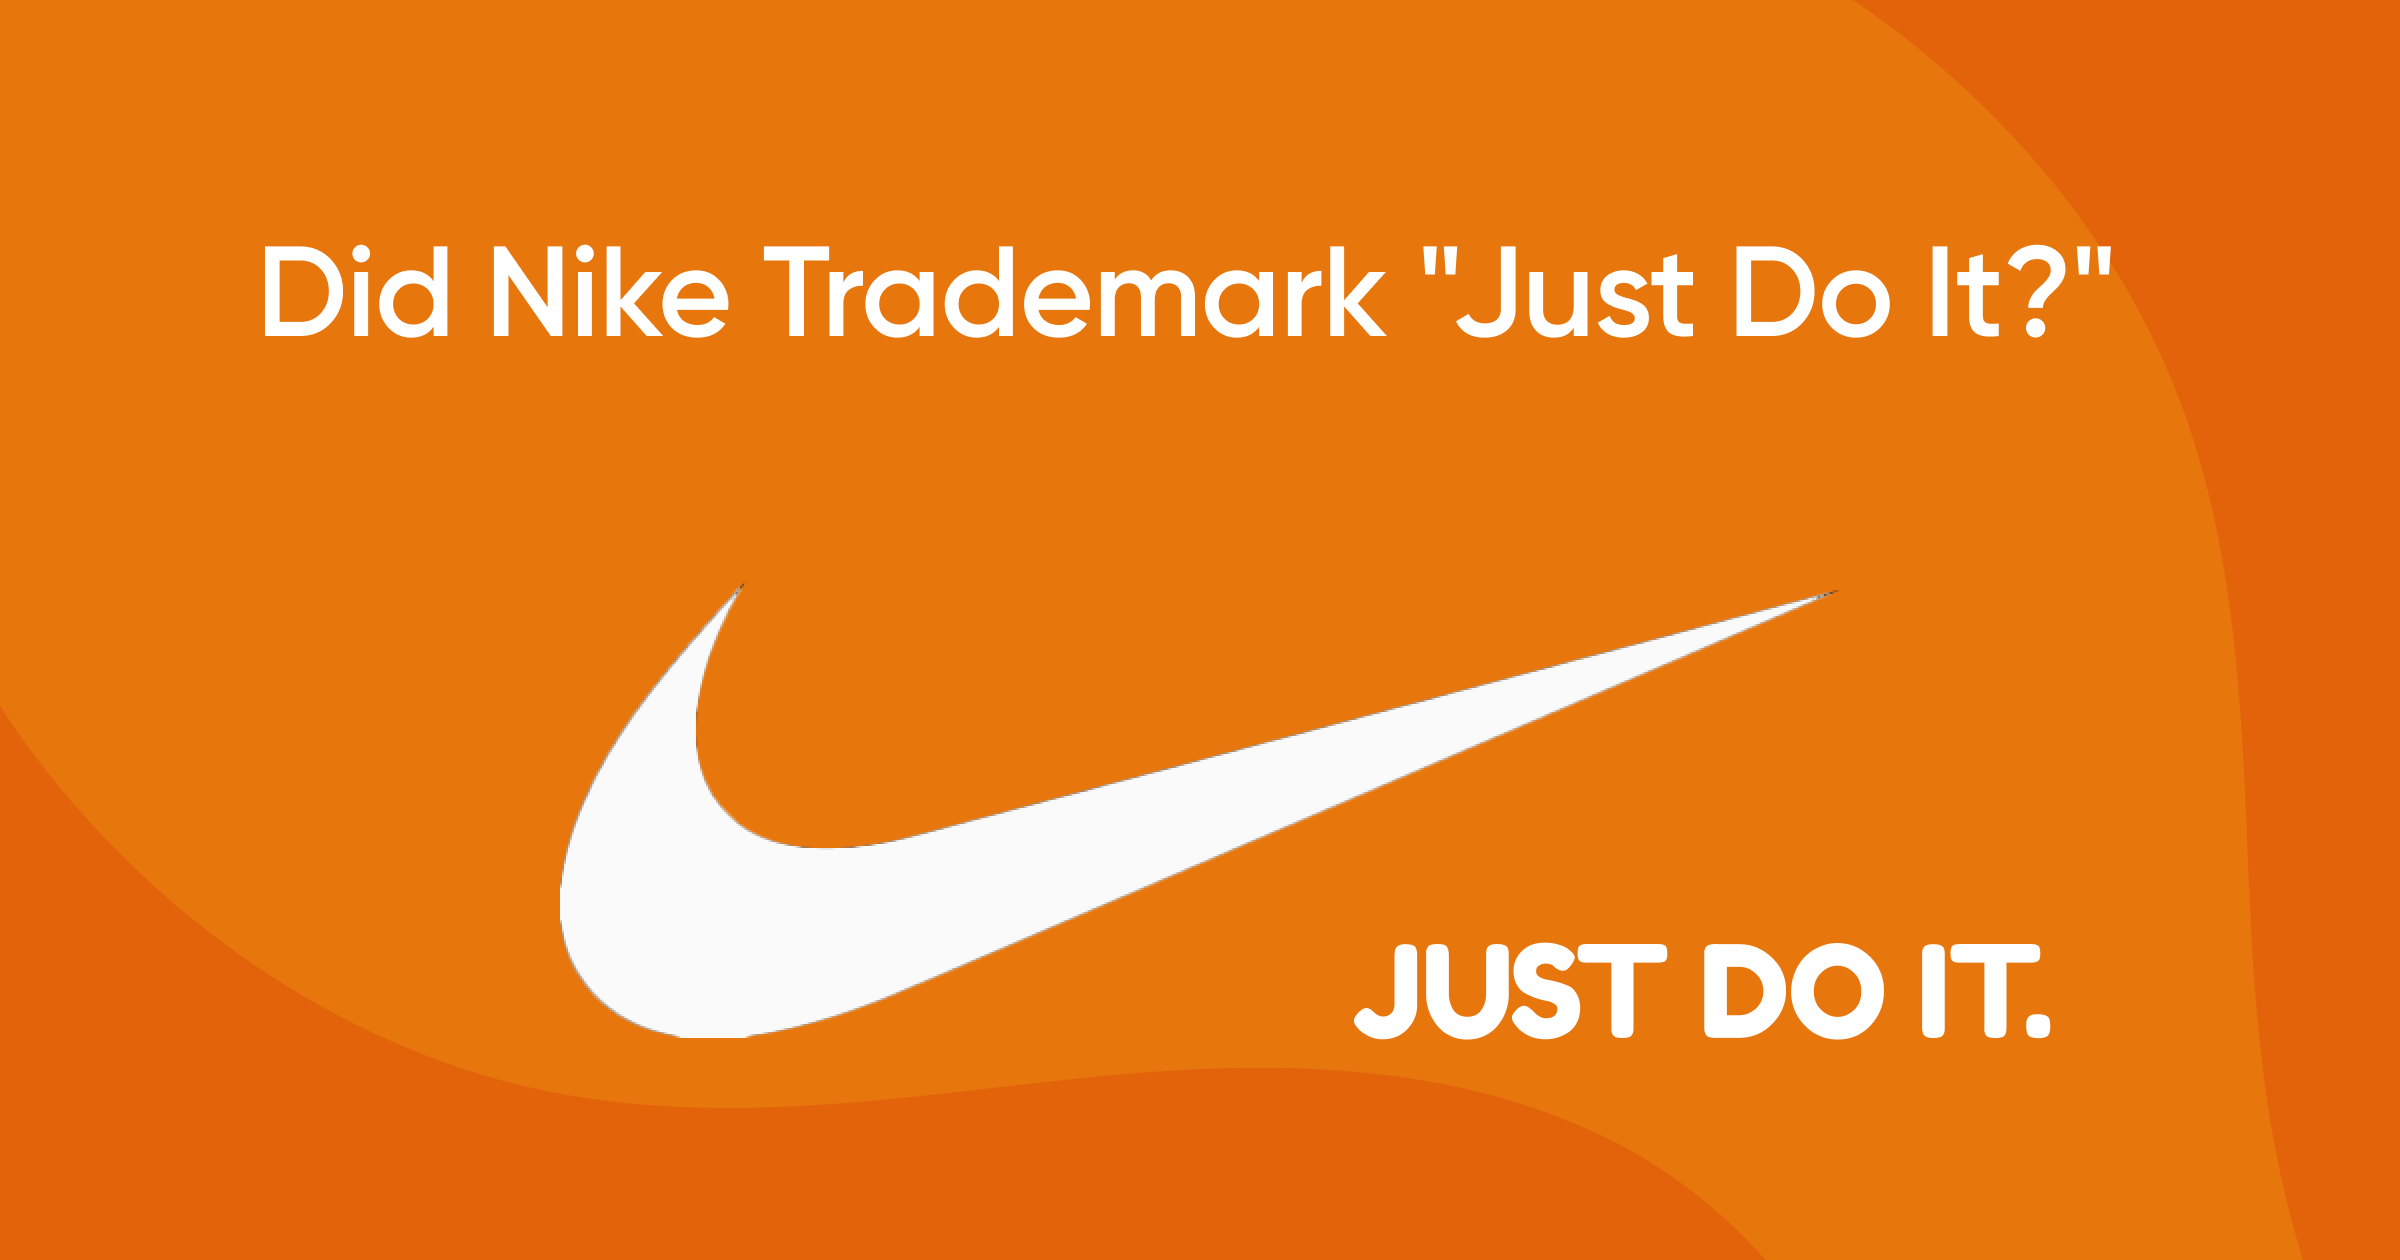  Did Nike Trademark “Just Do It?” Let’s Explore. 